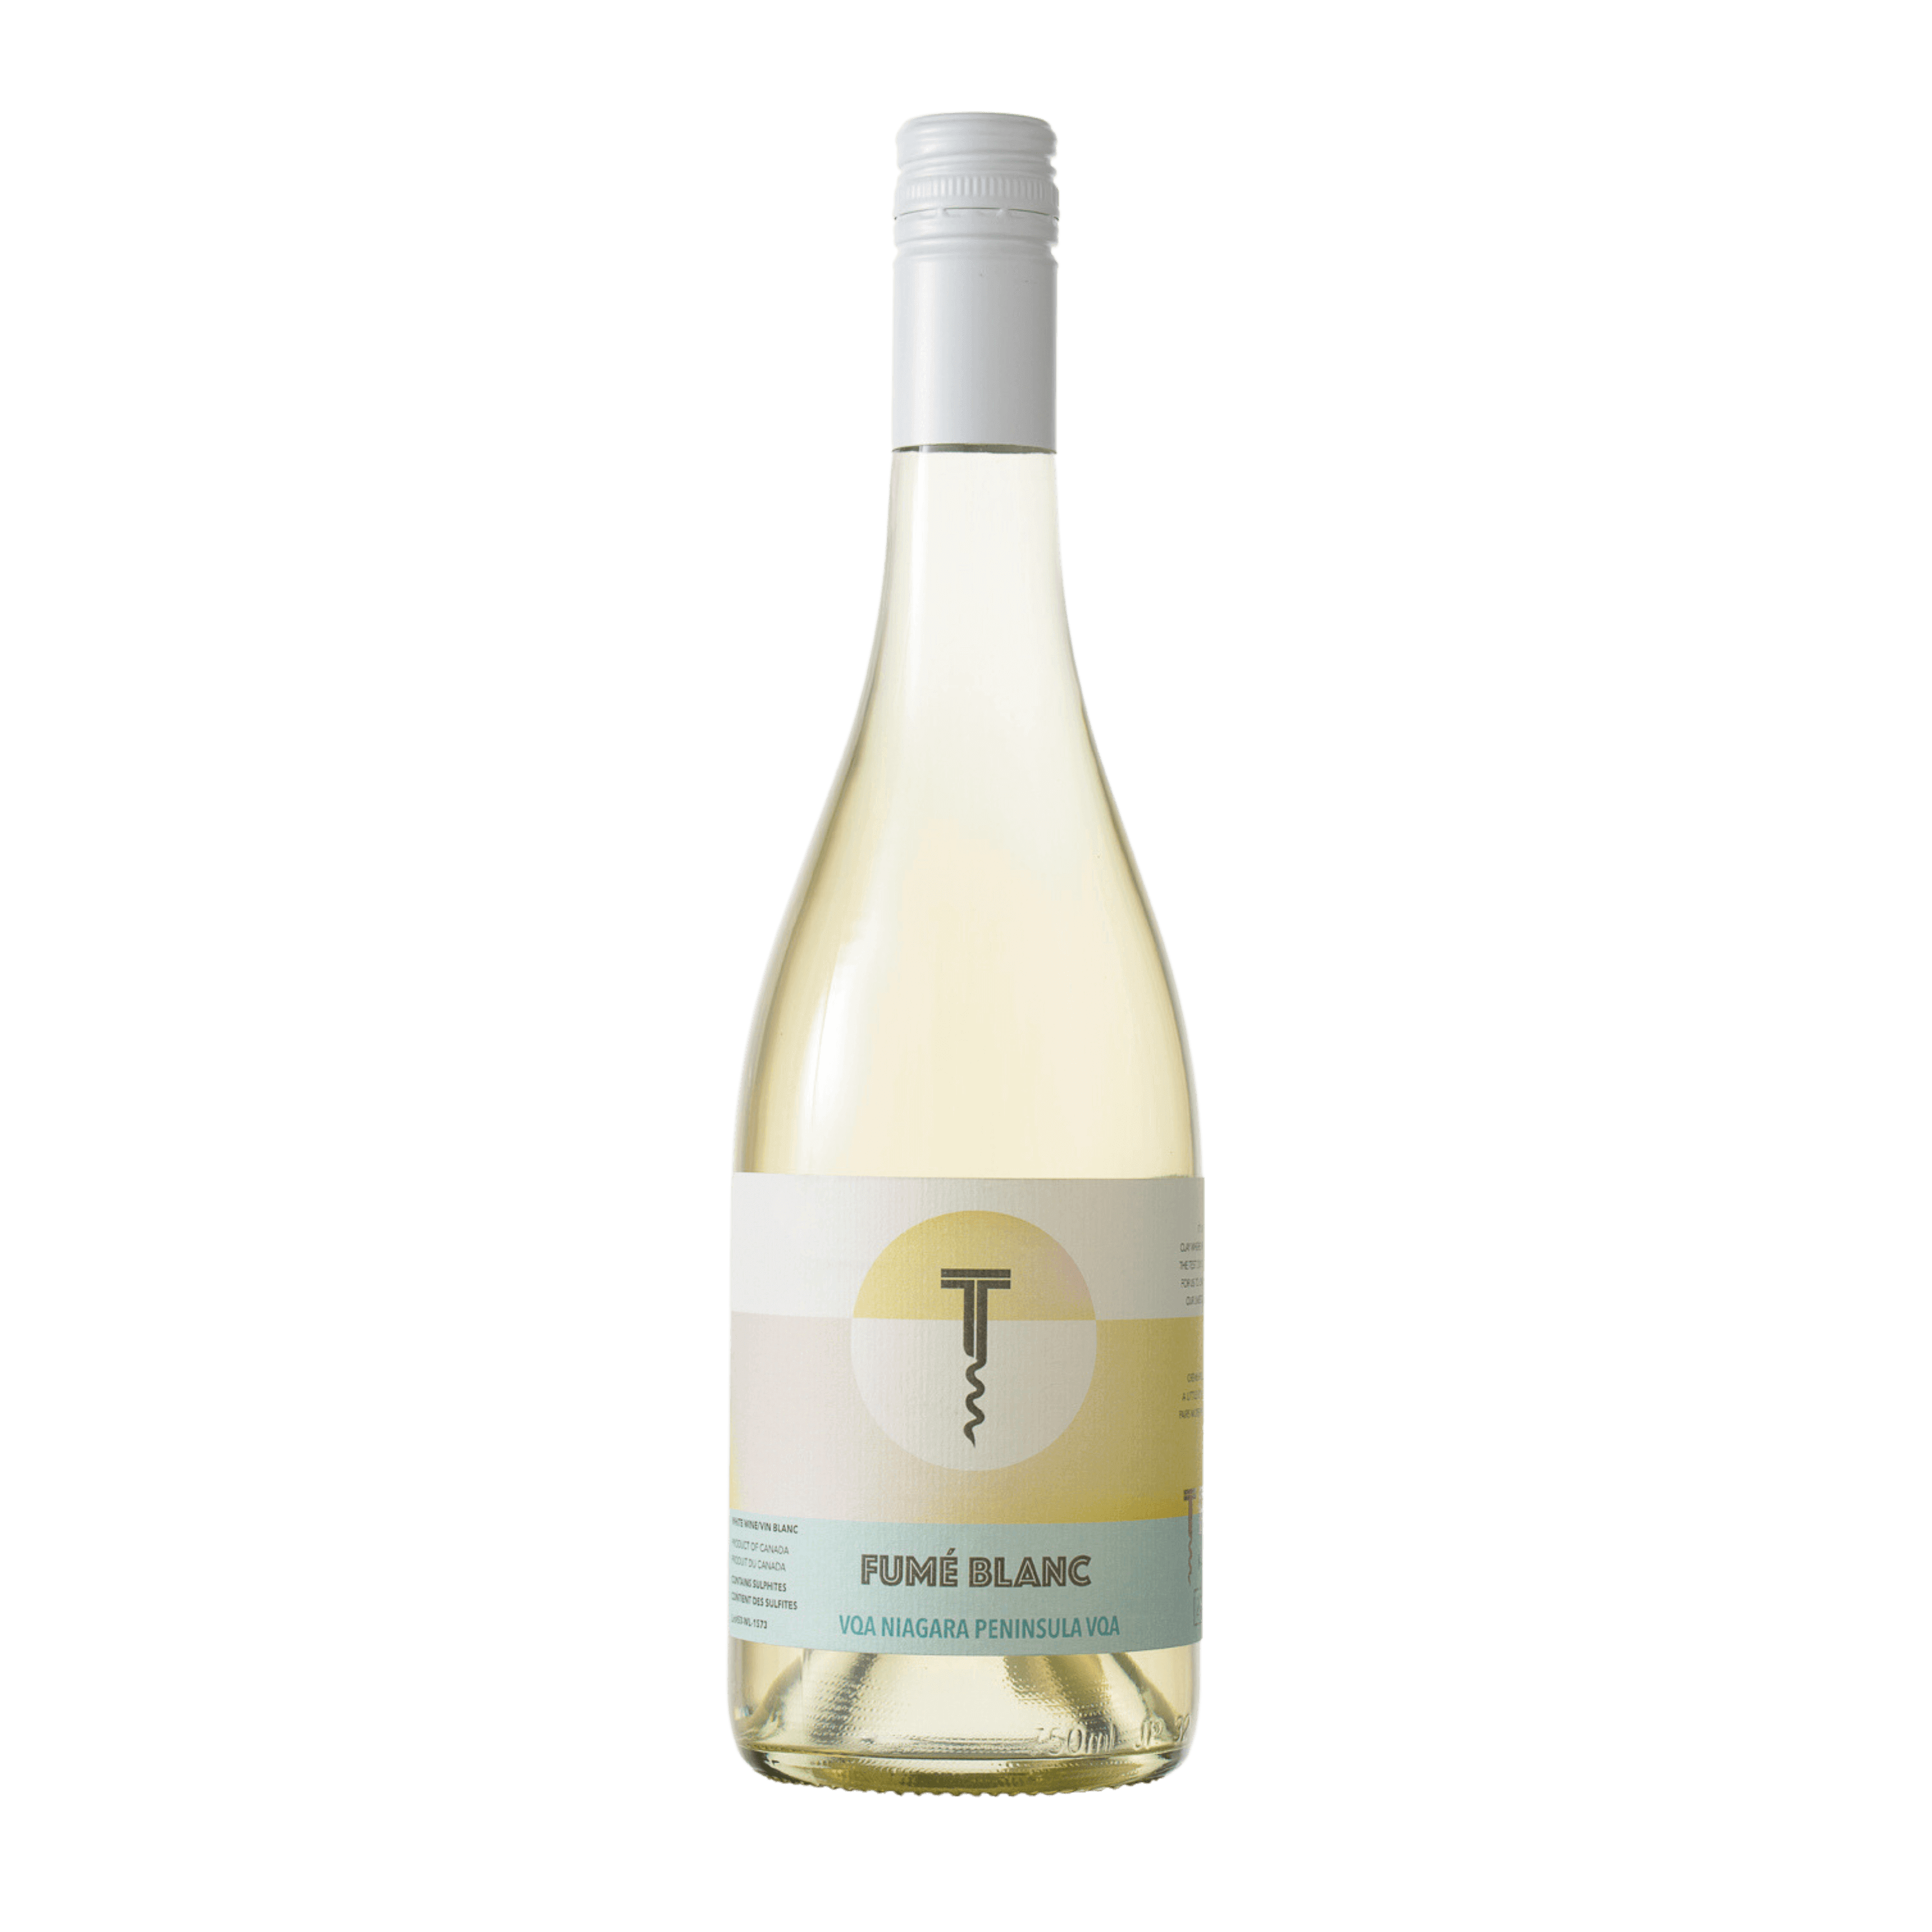 Images of Fumé blanc white wine from Traynor Family Vineyard a winery in Prince Edward County, Ontario